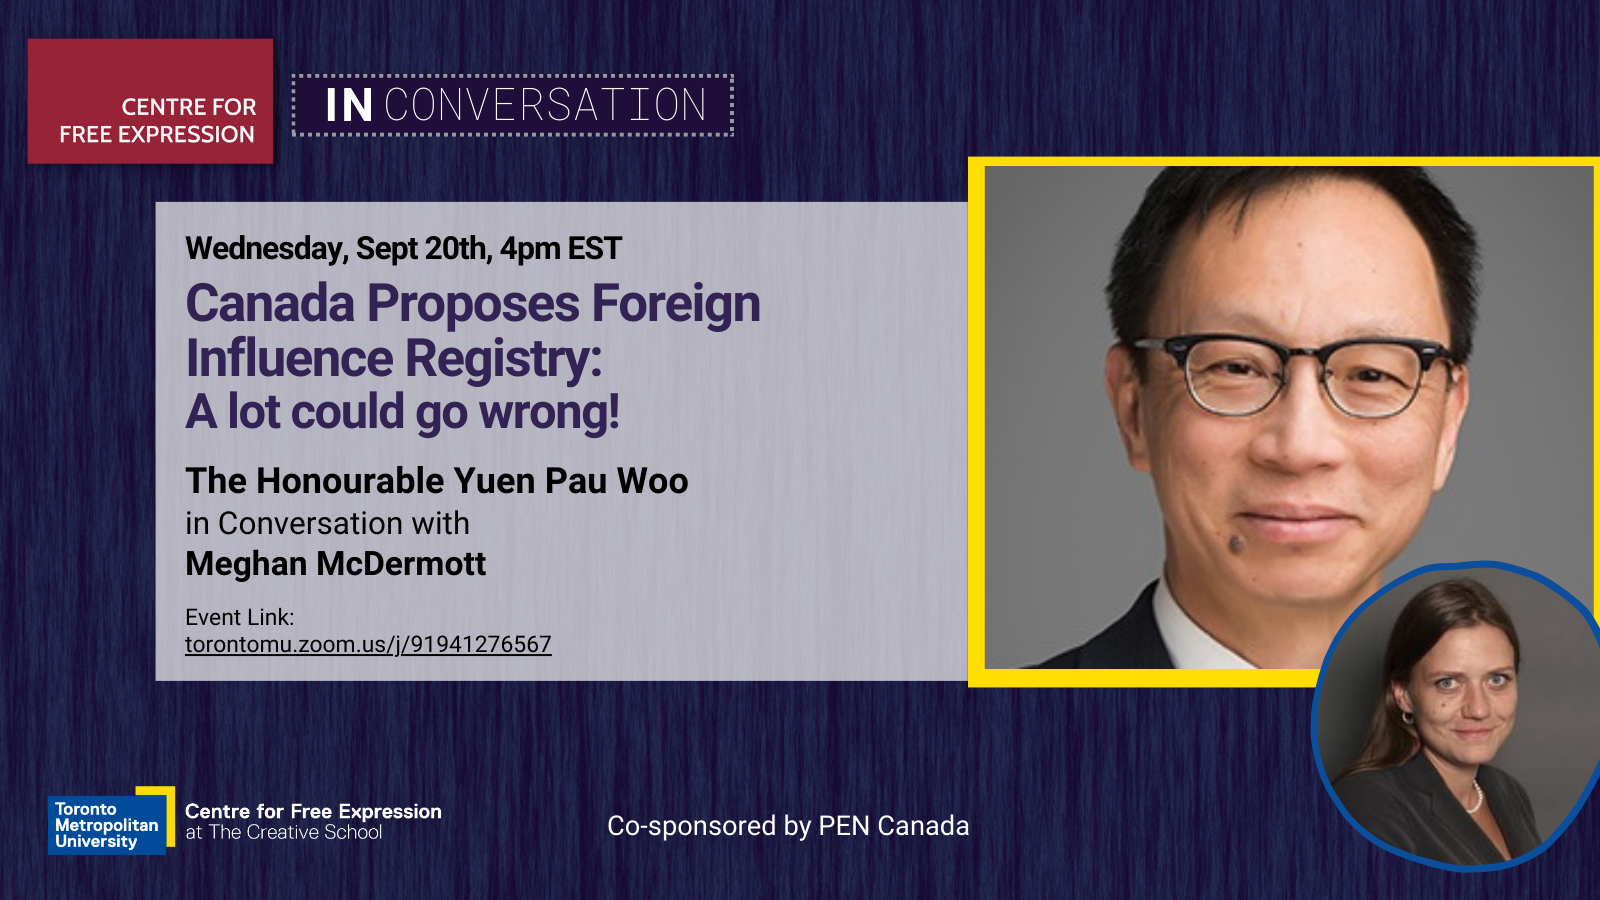 FREE CFE event: "Canada Proposes Foreign Influence Registry: A lot could go wrong!"